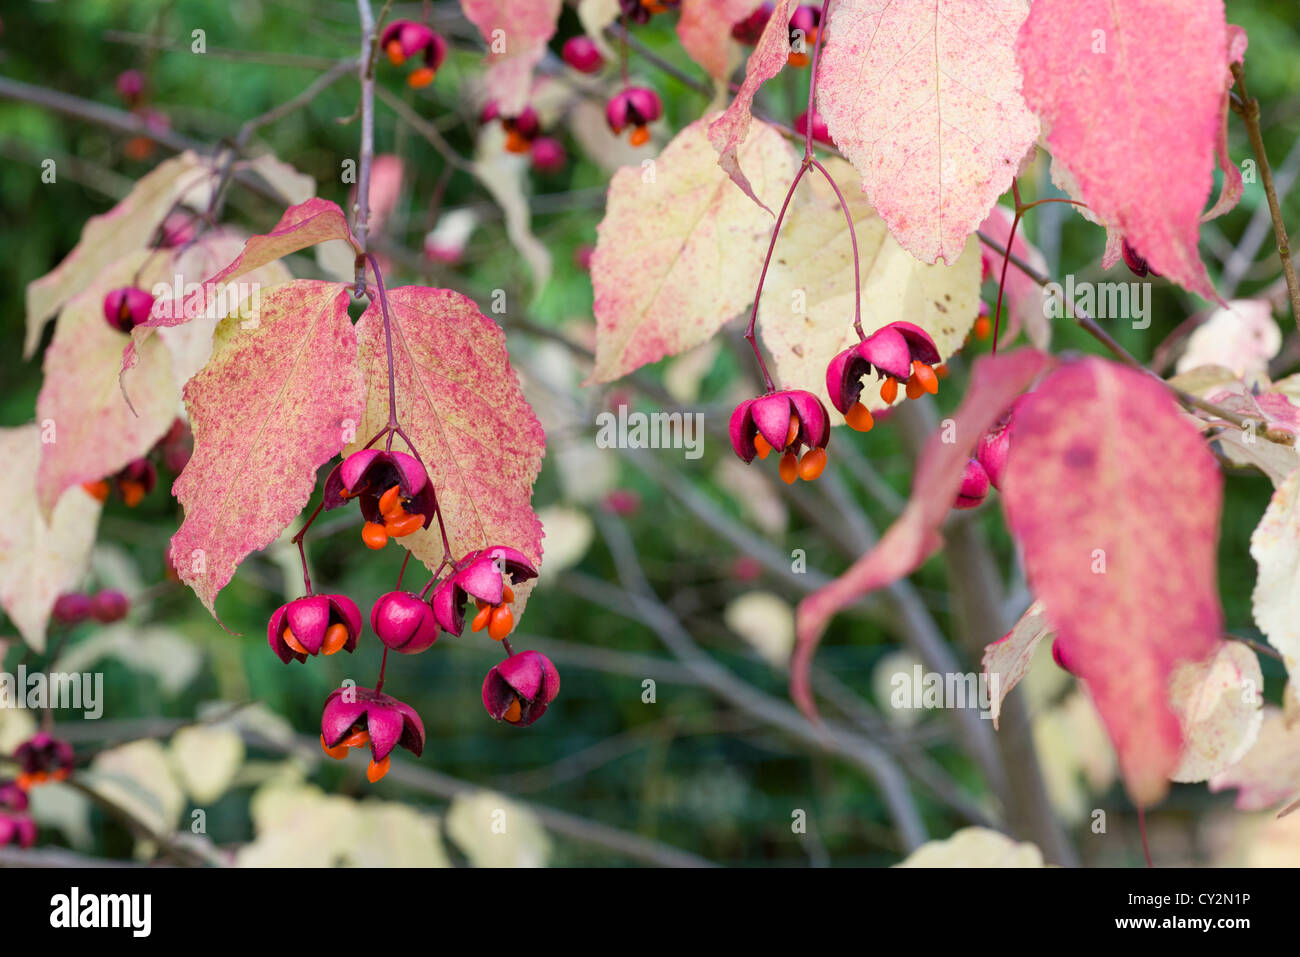 Spindle, euonymus oxyphyllus, showing the seed cases ejecting seeds, England, October Stock Photo